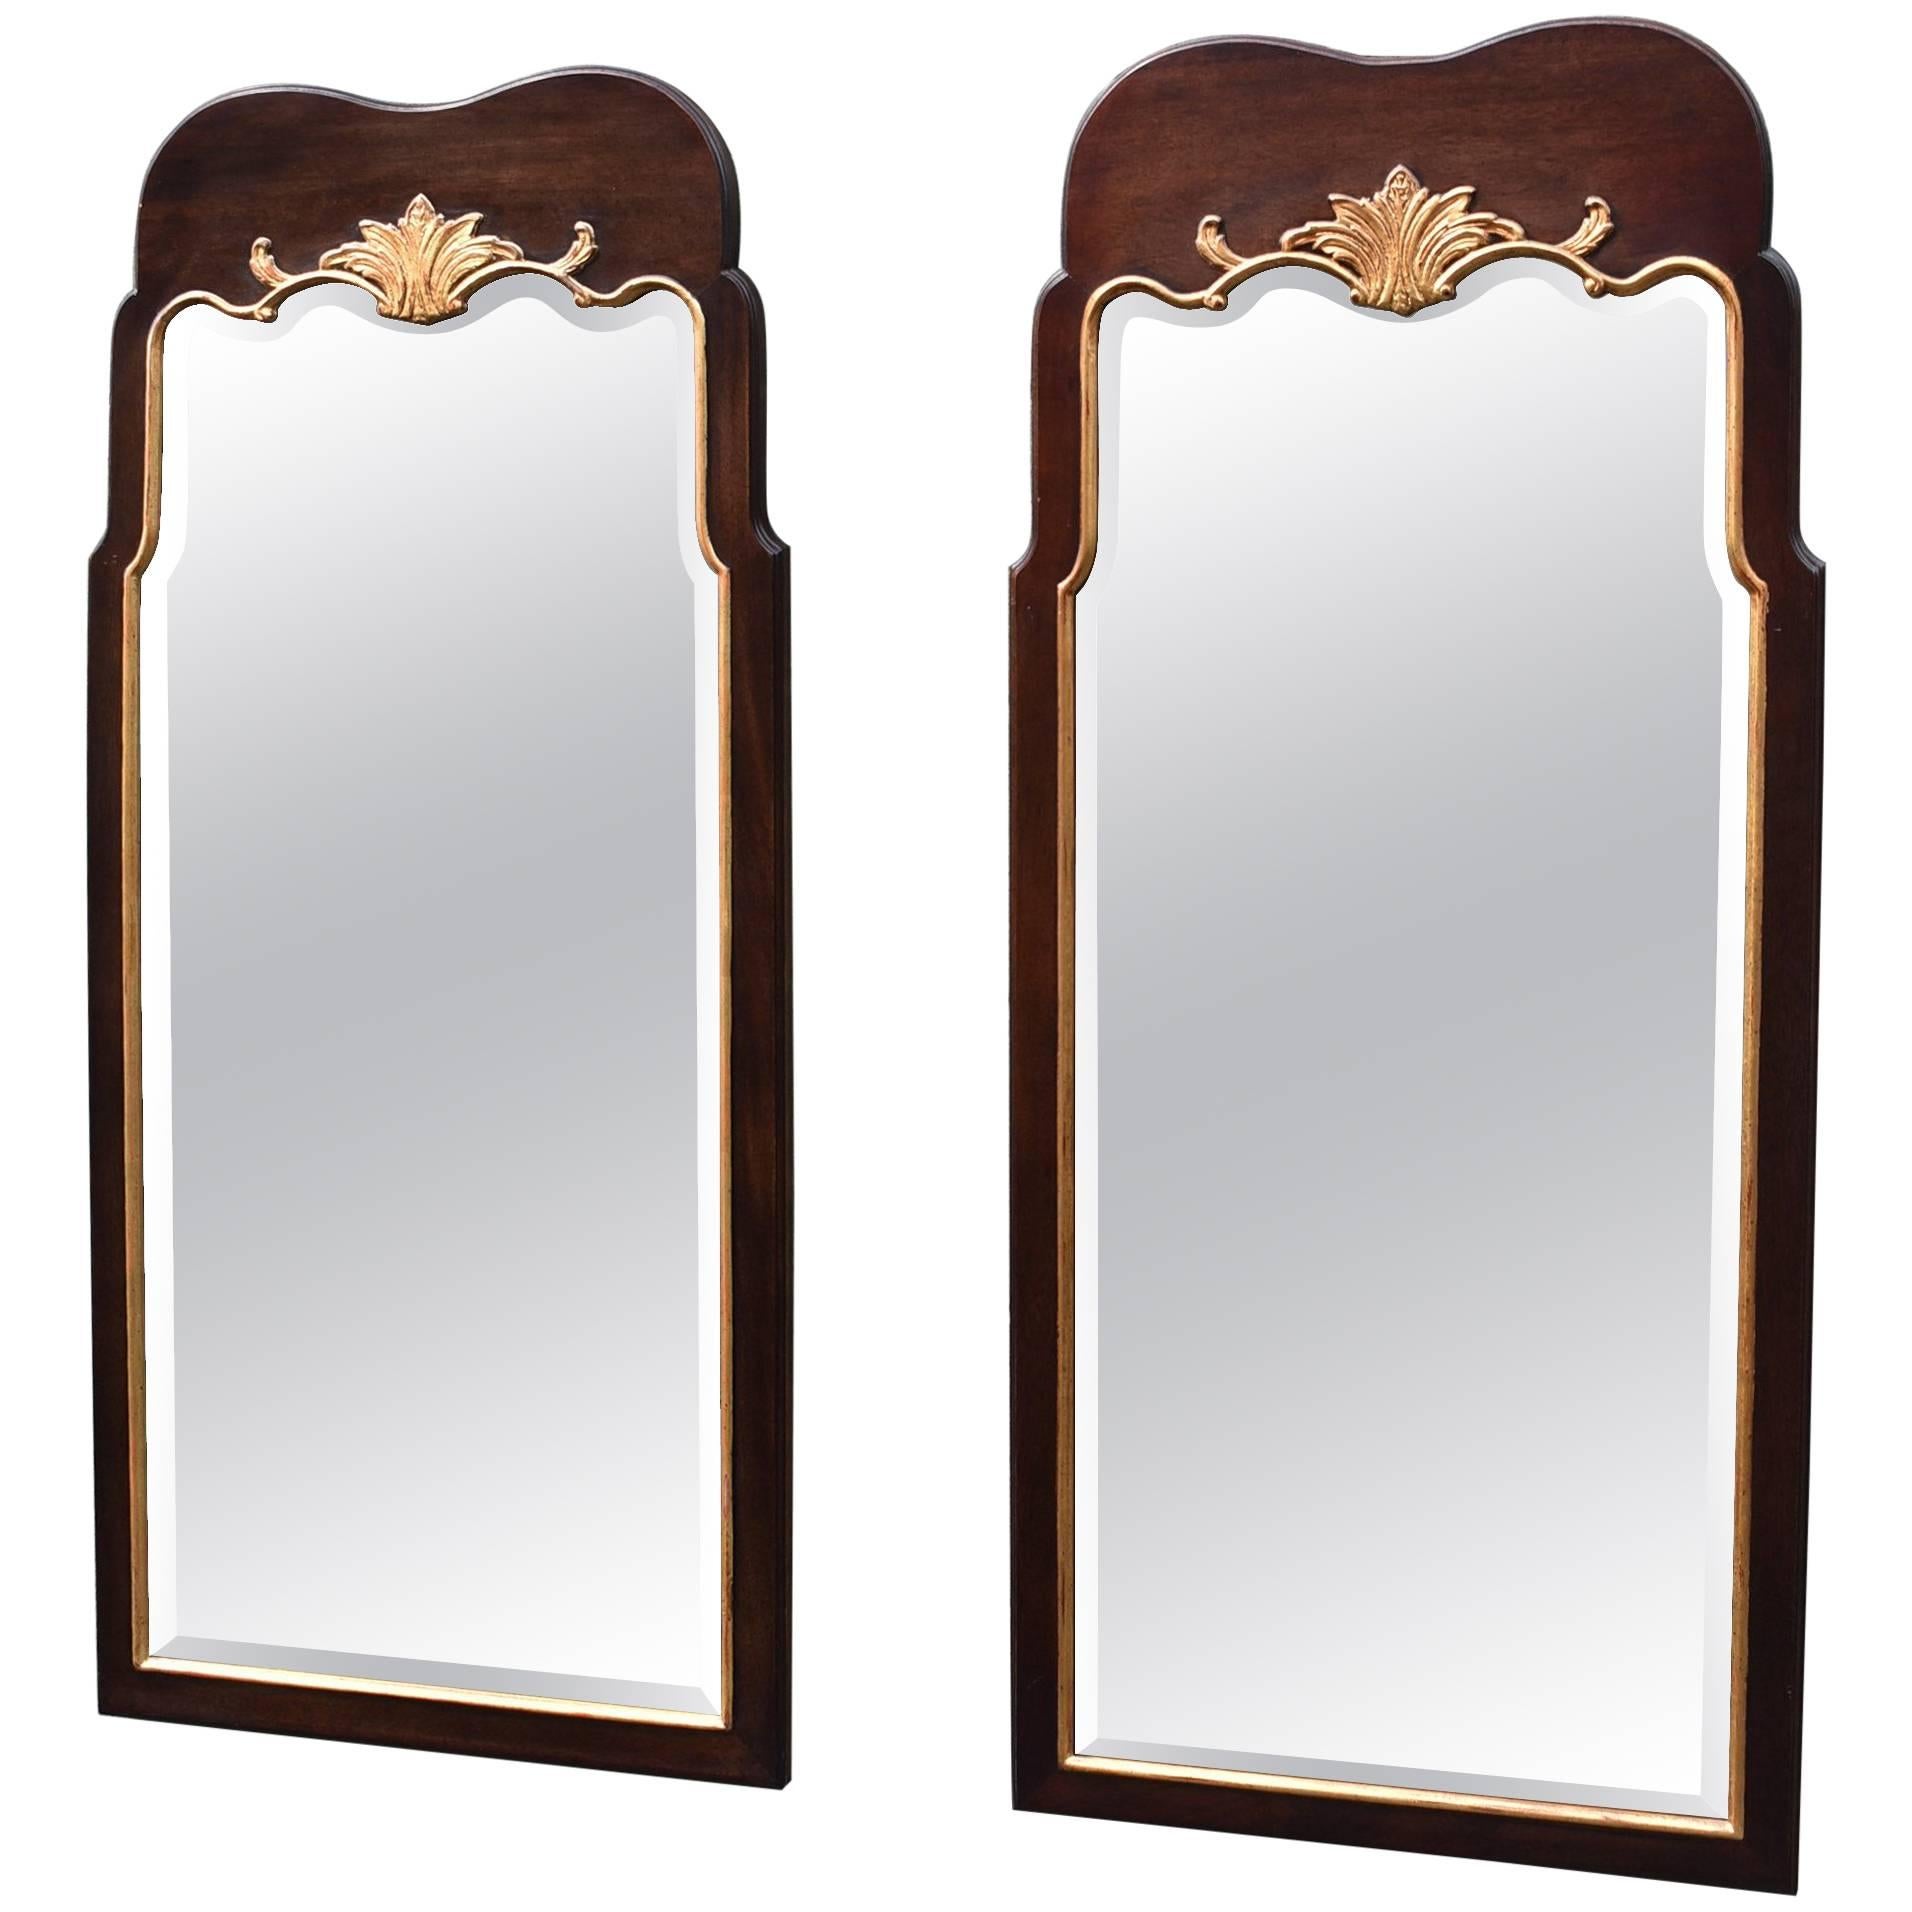 Pair of Walnut Chippendale Beveled Glass Mirrors with Gold Gilt Trim by Henredon